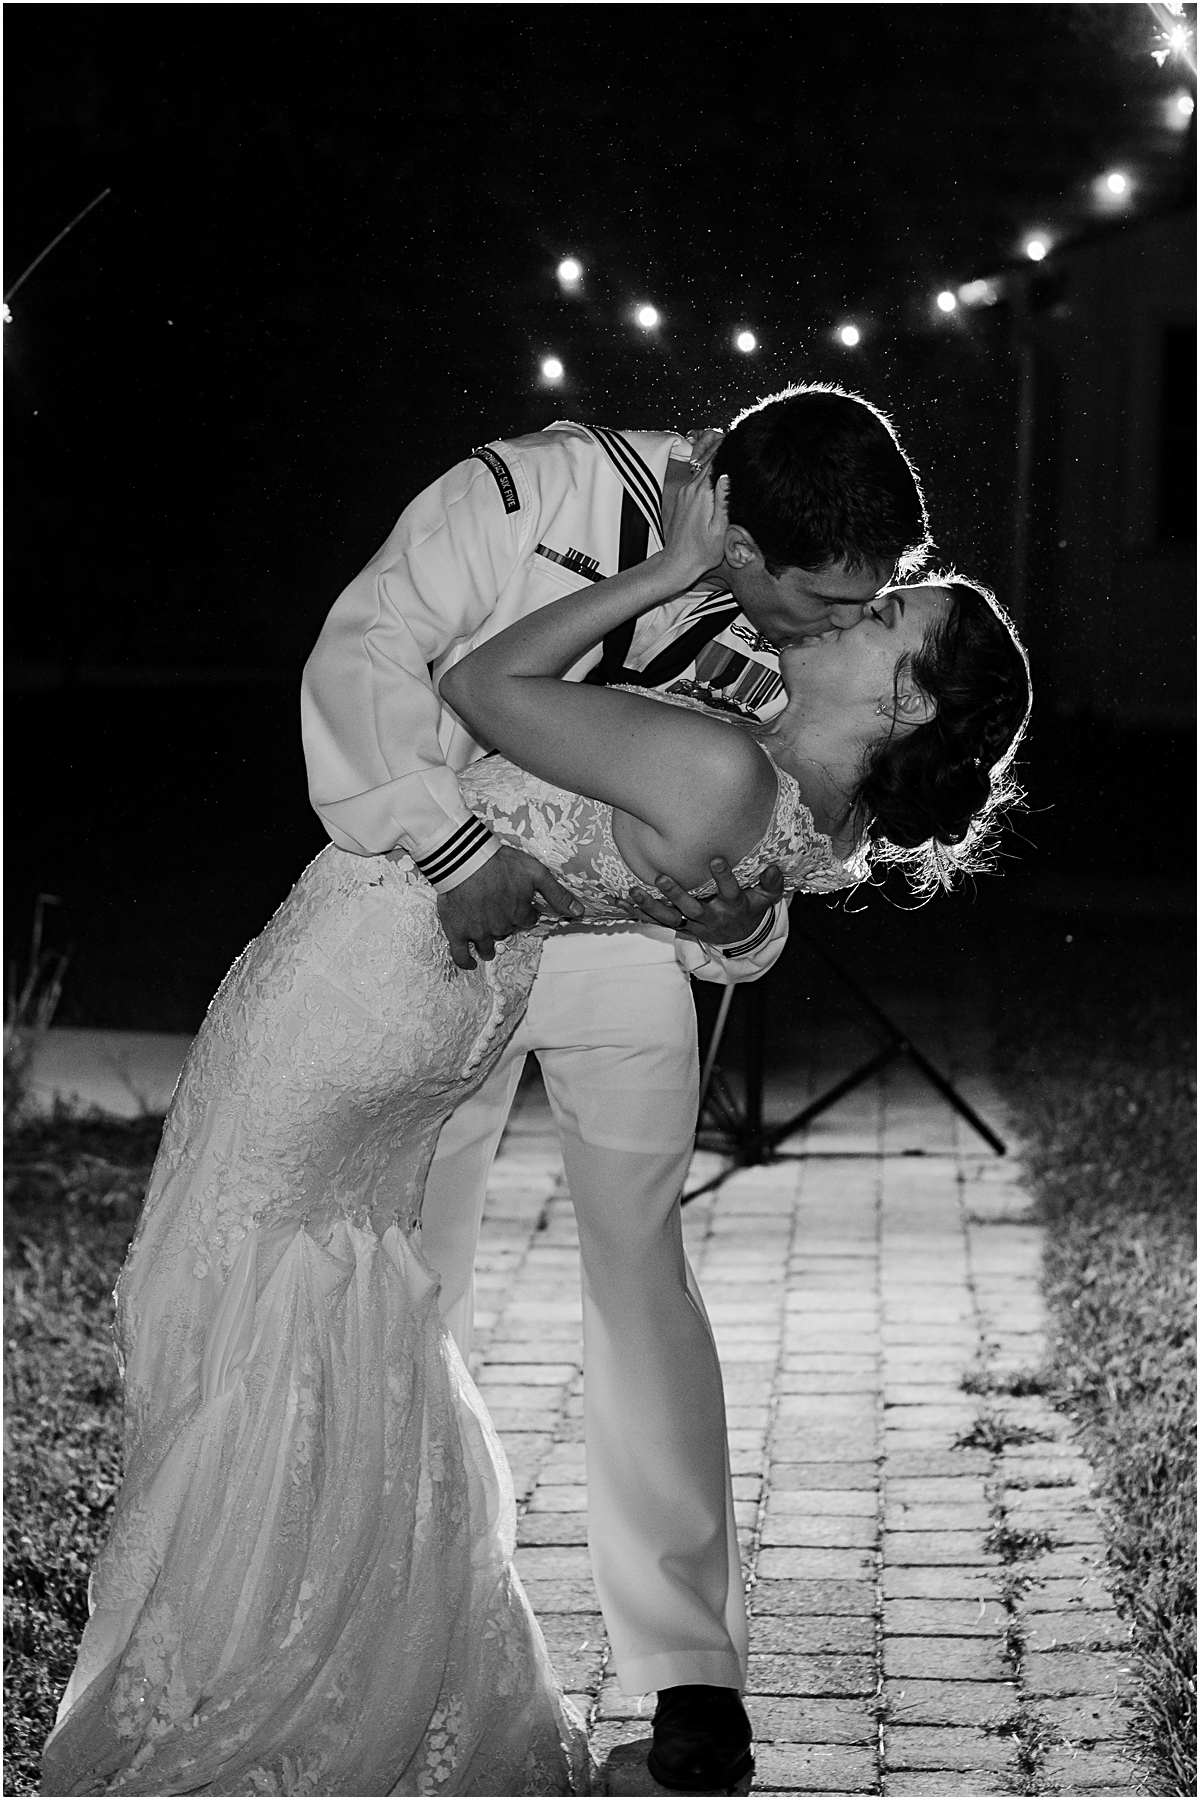 Ryan dipping and kissing Gabby. Wedding photography in Maryland done by Ashley.